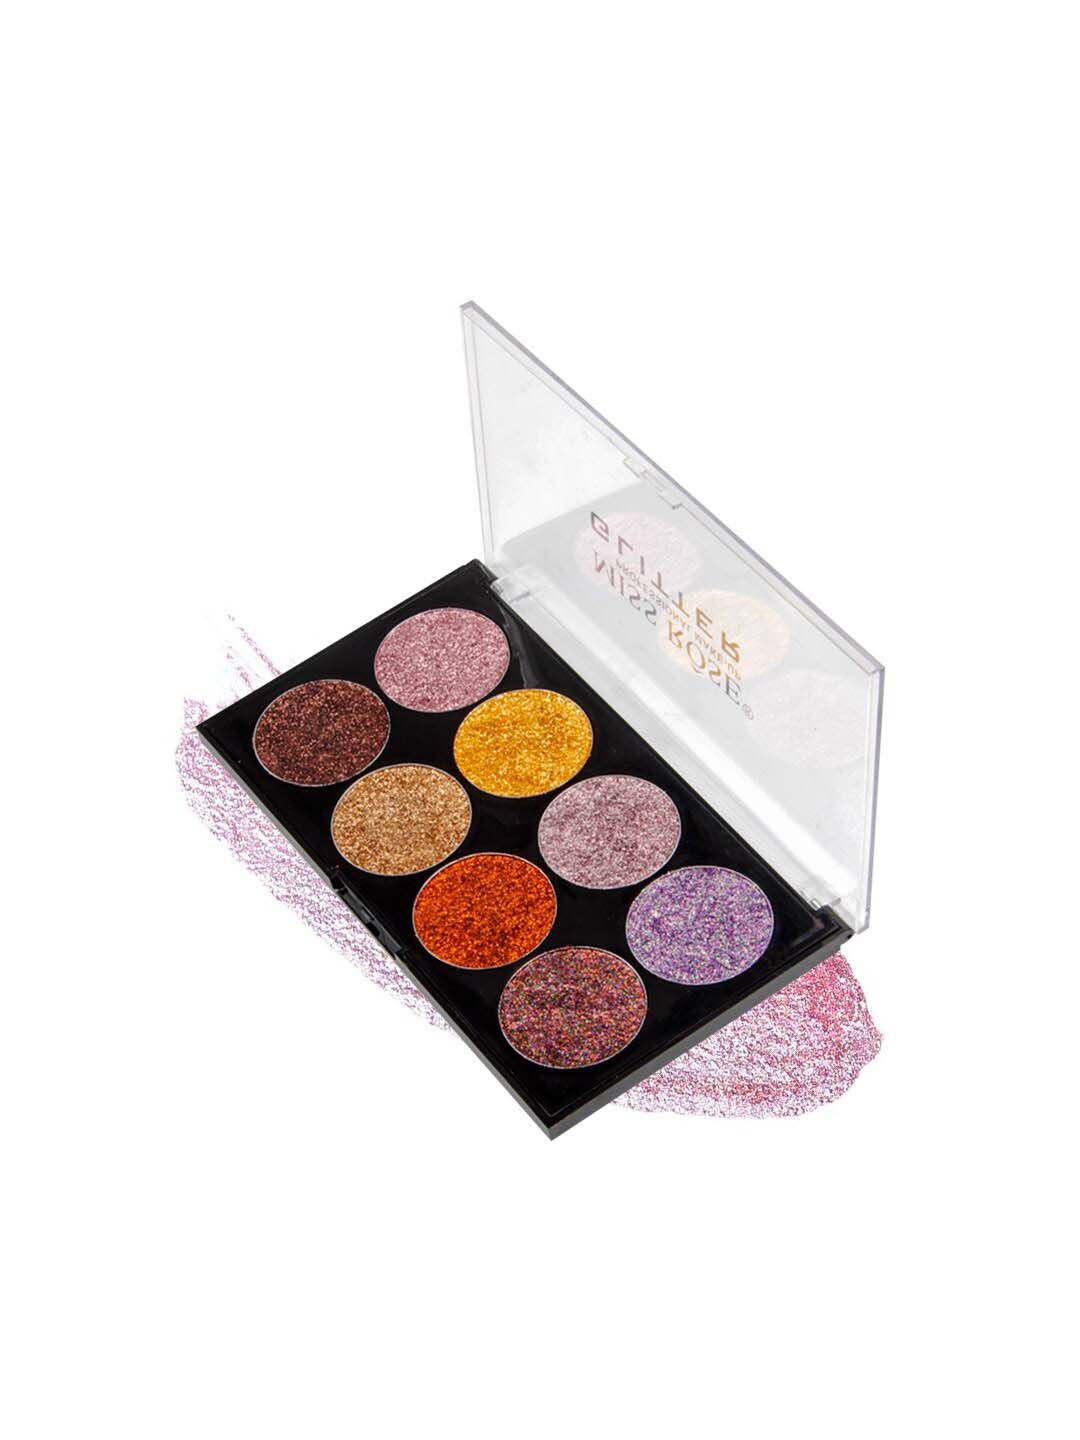 MISS ROSE Set of 8 Multicolor Glitter Eyeshadow Palette 7001-88M 03 Price in India